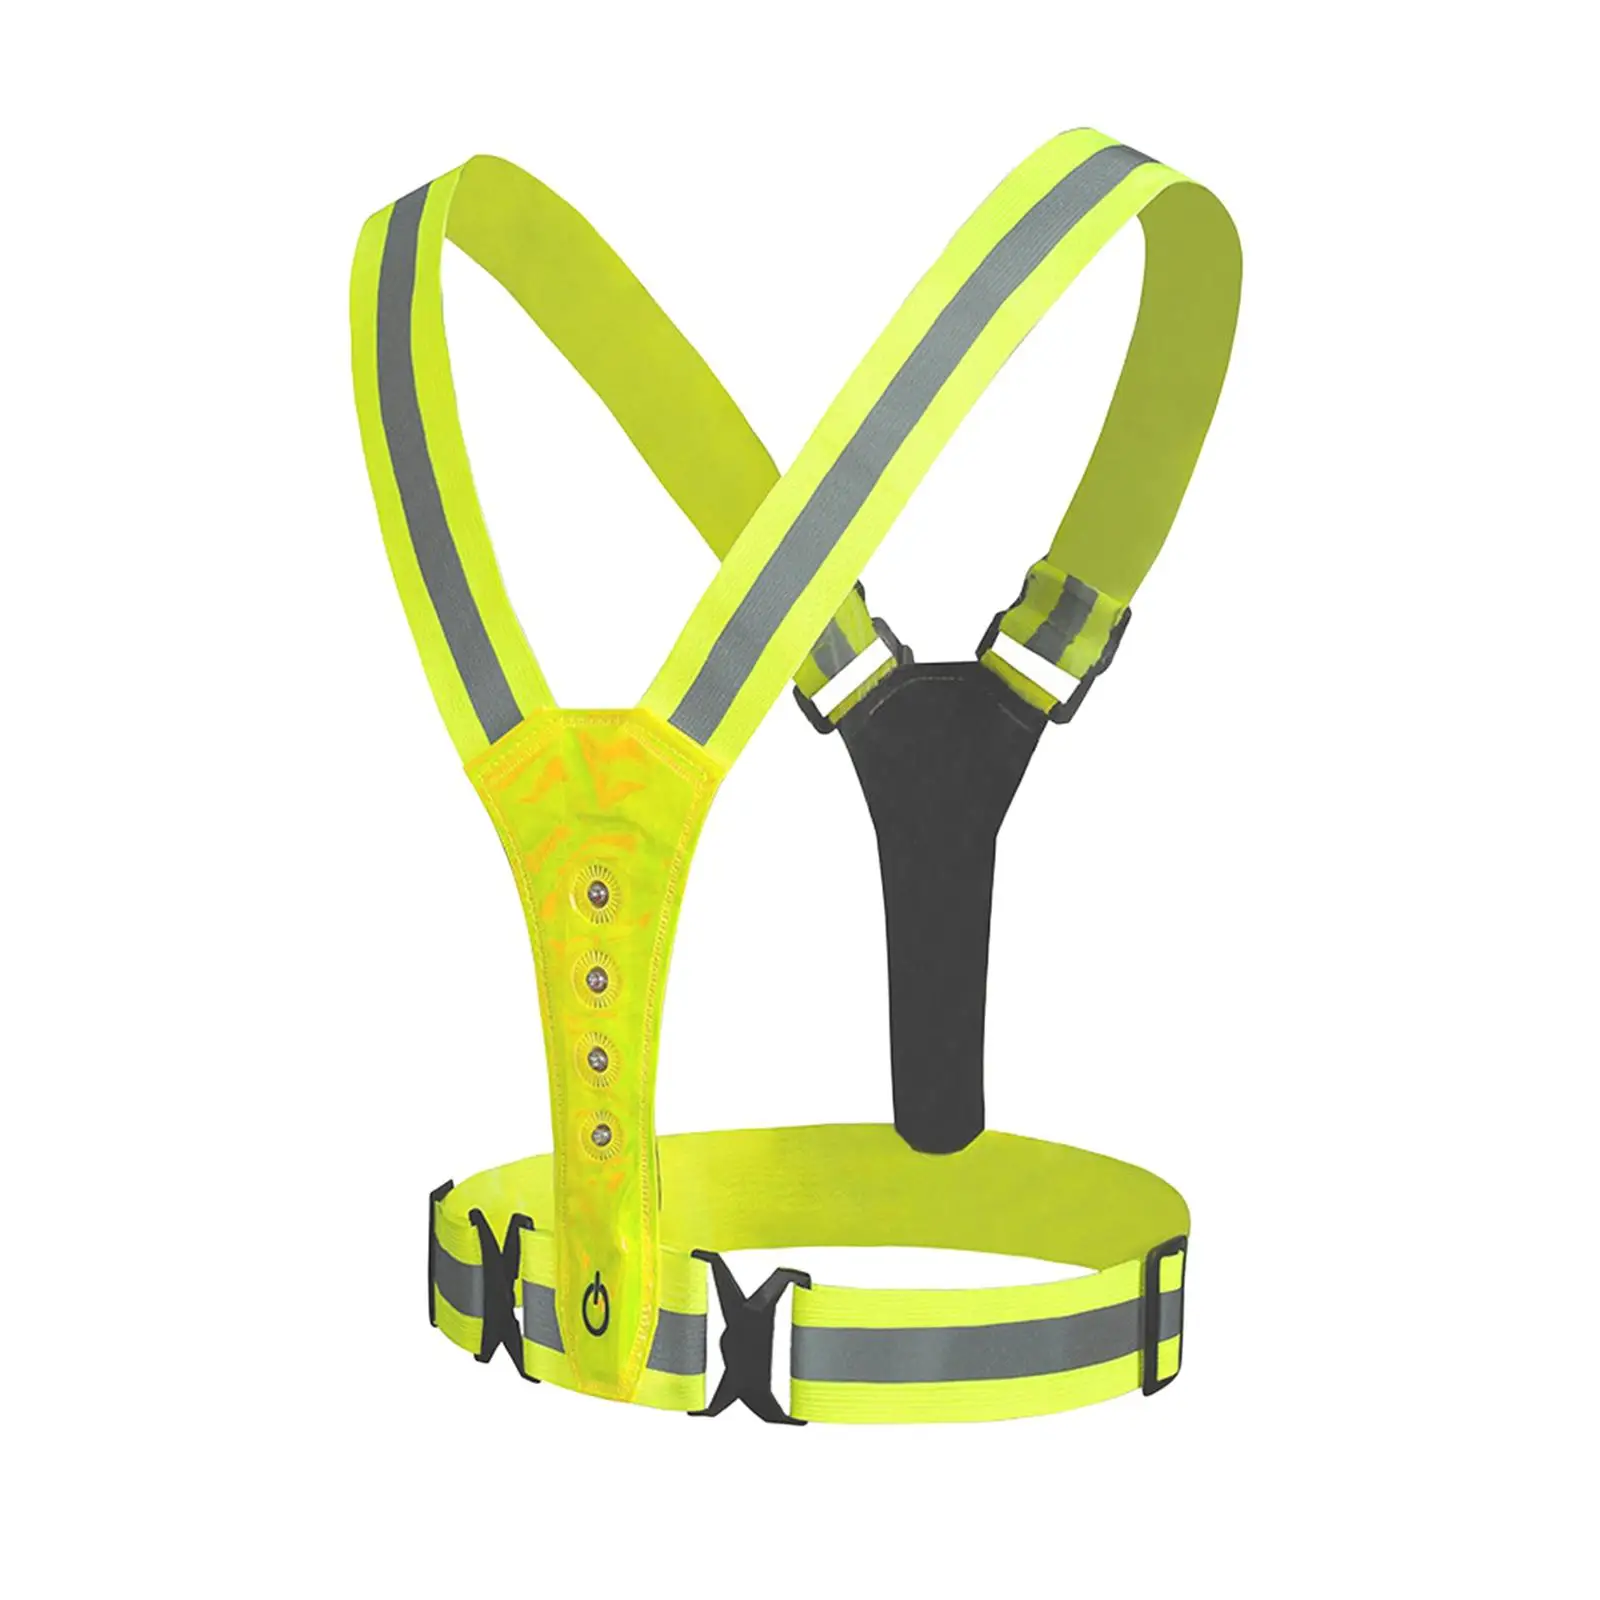 LED Reflective Vest Glowing High Visibility Adjustable Elastic for Runners